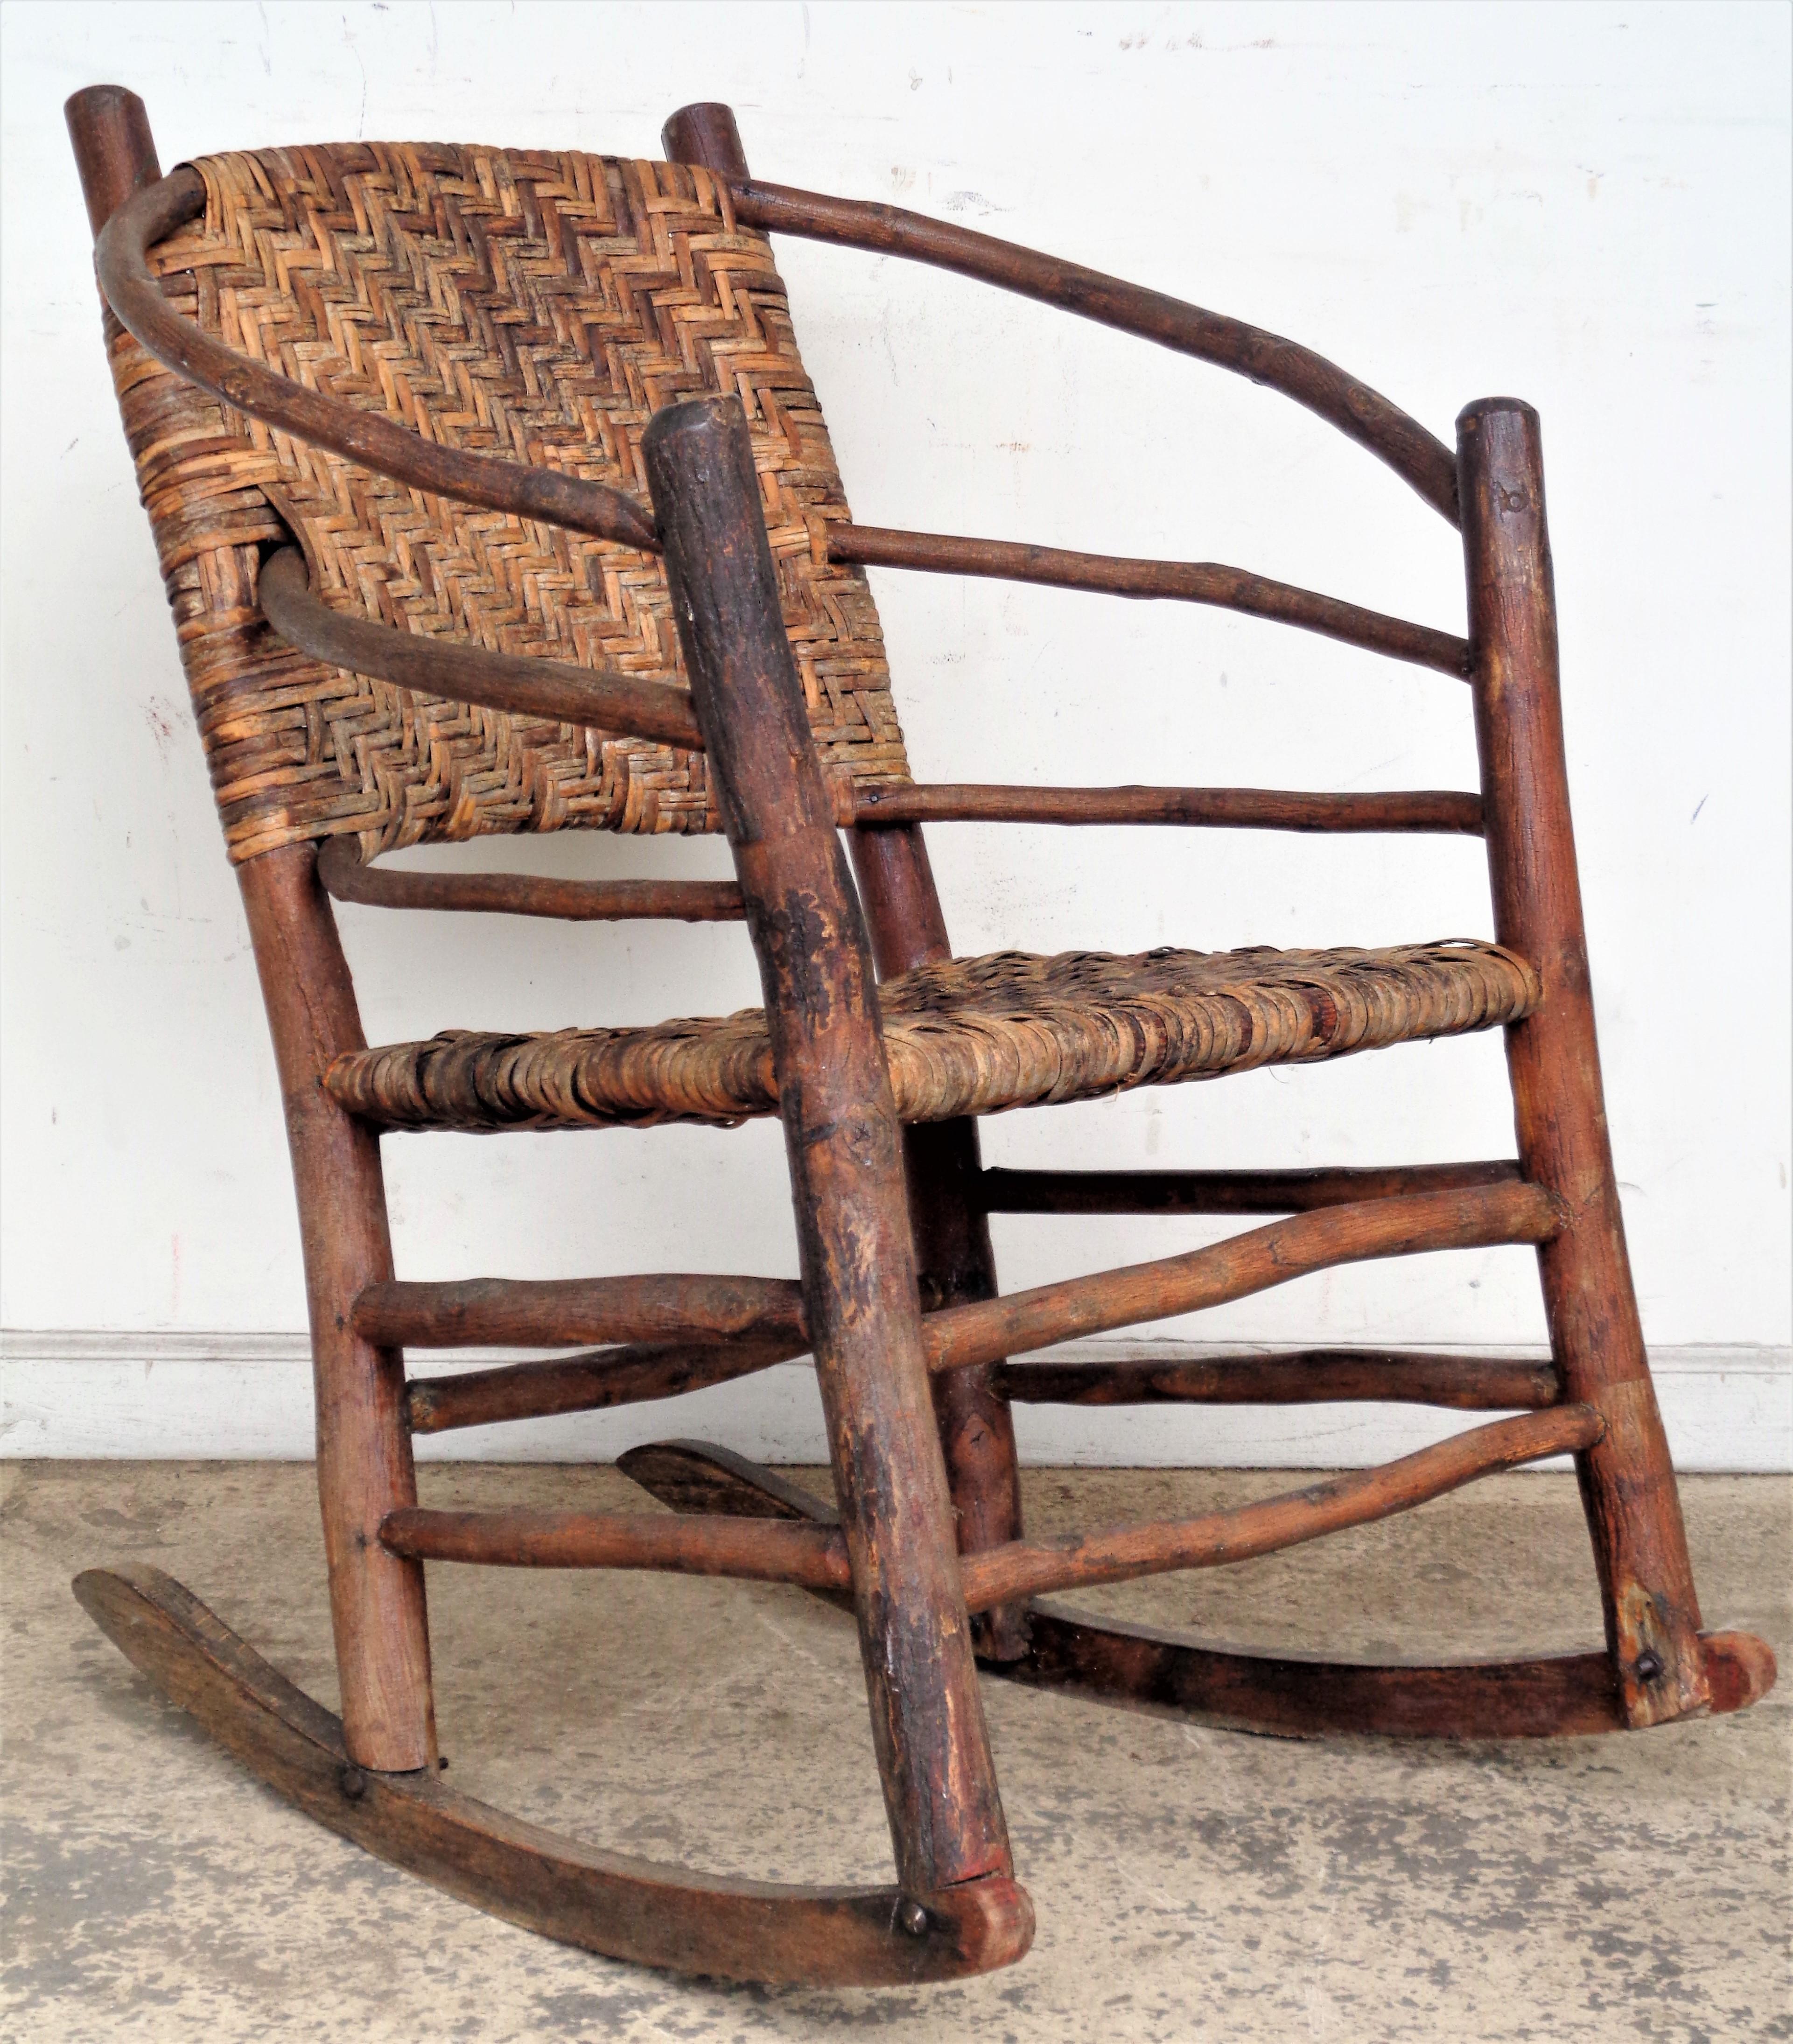 Antique Rustic Hickory Furniture - Settee, Chair, Rocker 2